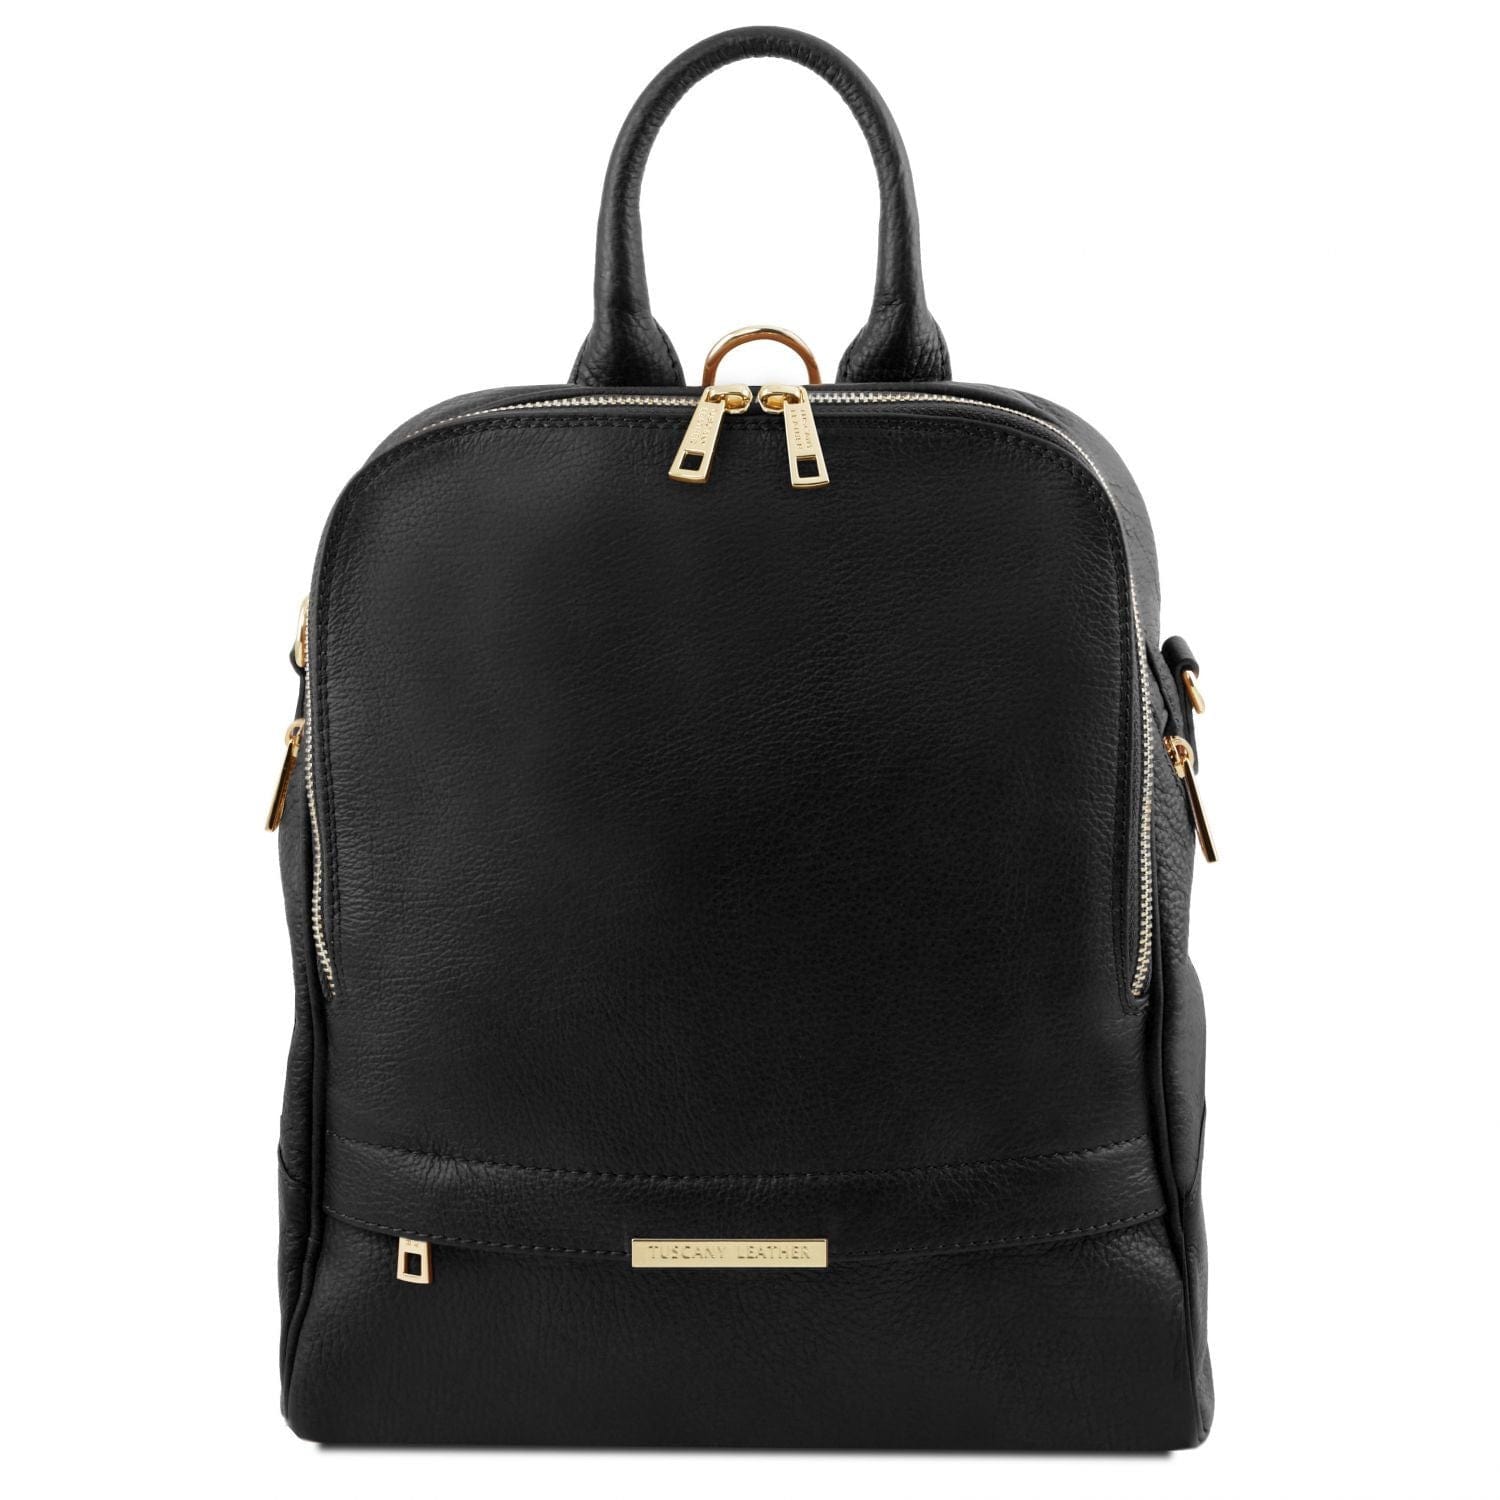 TL Bag - Soft leather backpack for women | TL141376 | Tuscany Leather ...